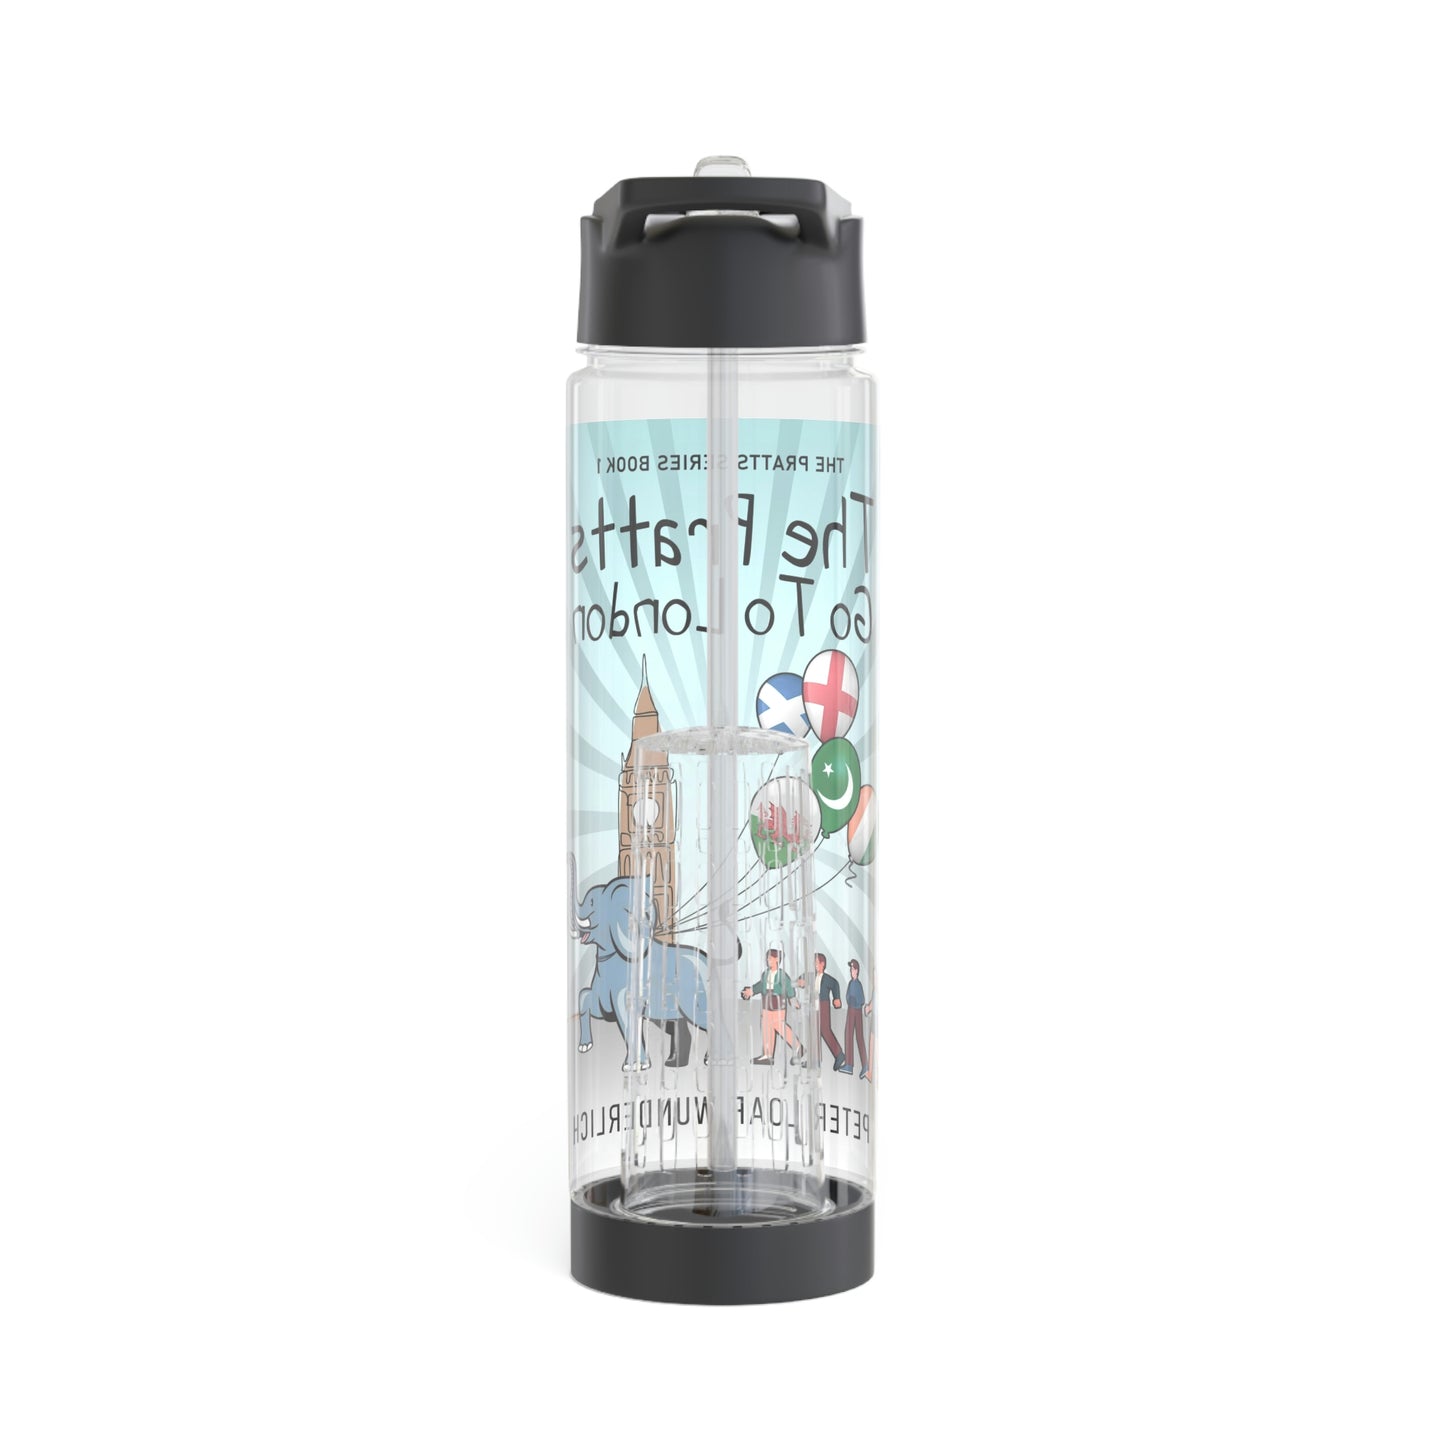 The Pratts Go To London - Infuser Water Bottle